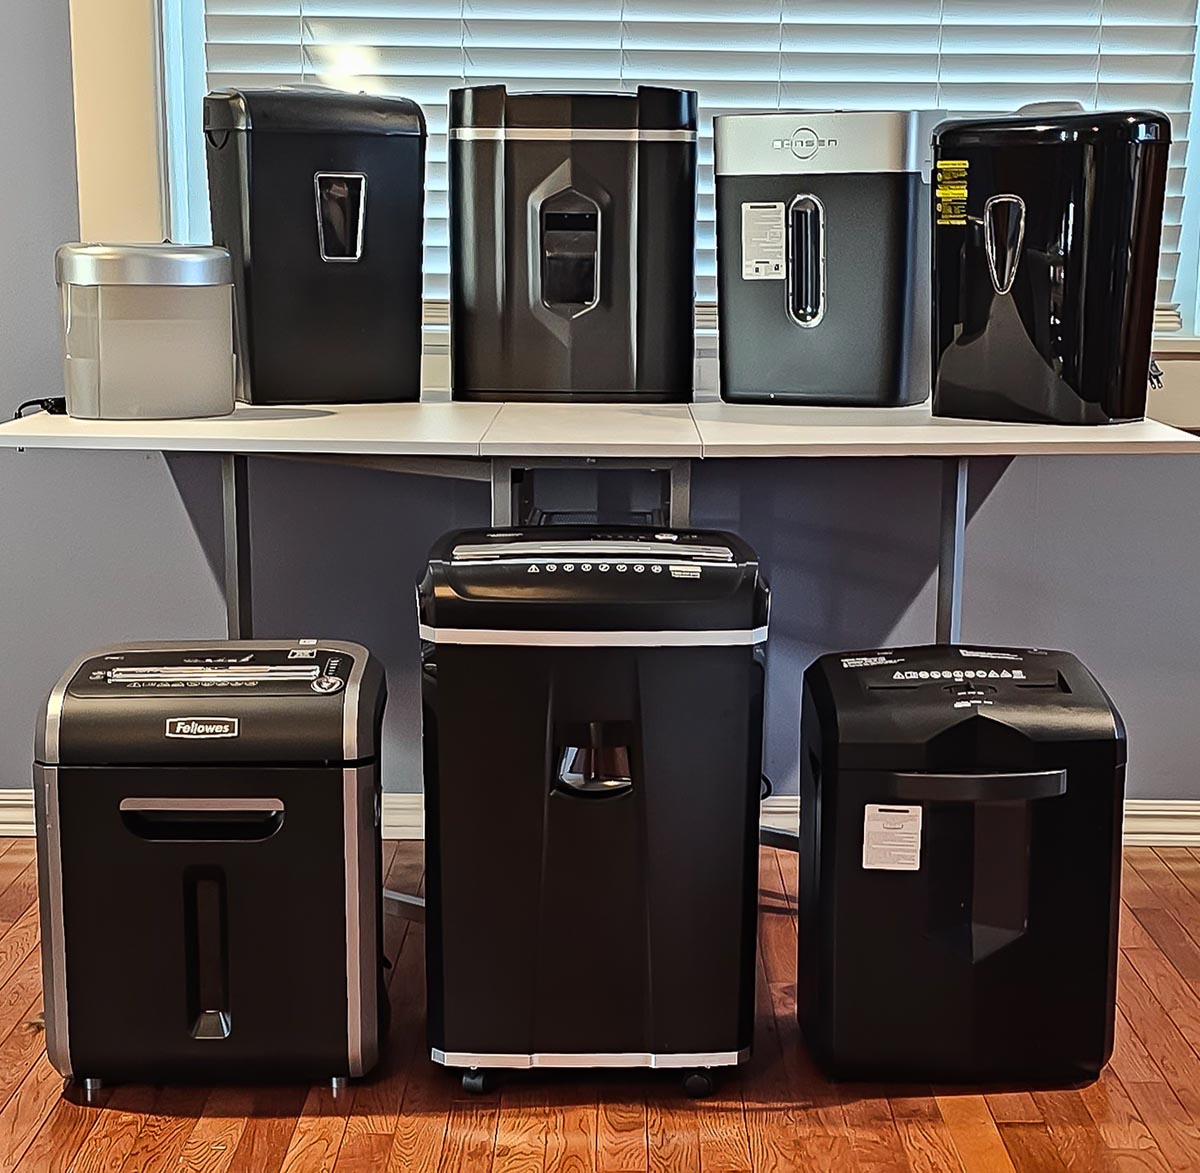 A group of the best paper shredder options grouped together in an office setting